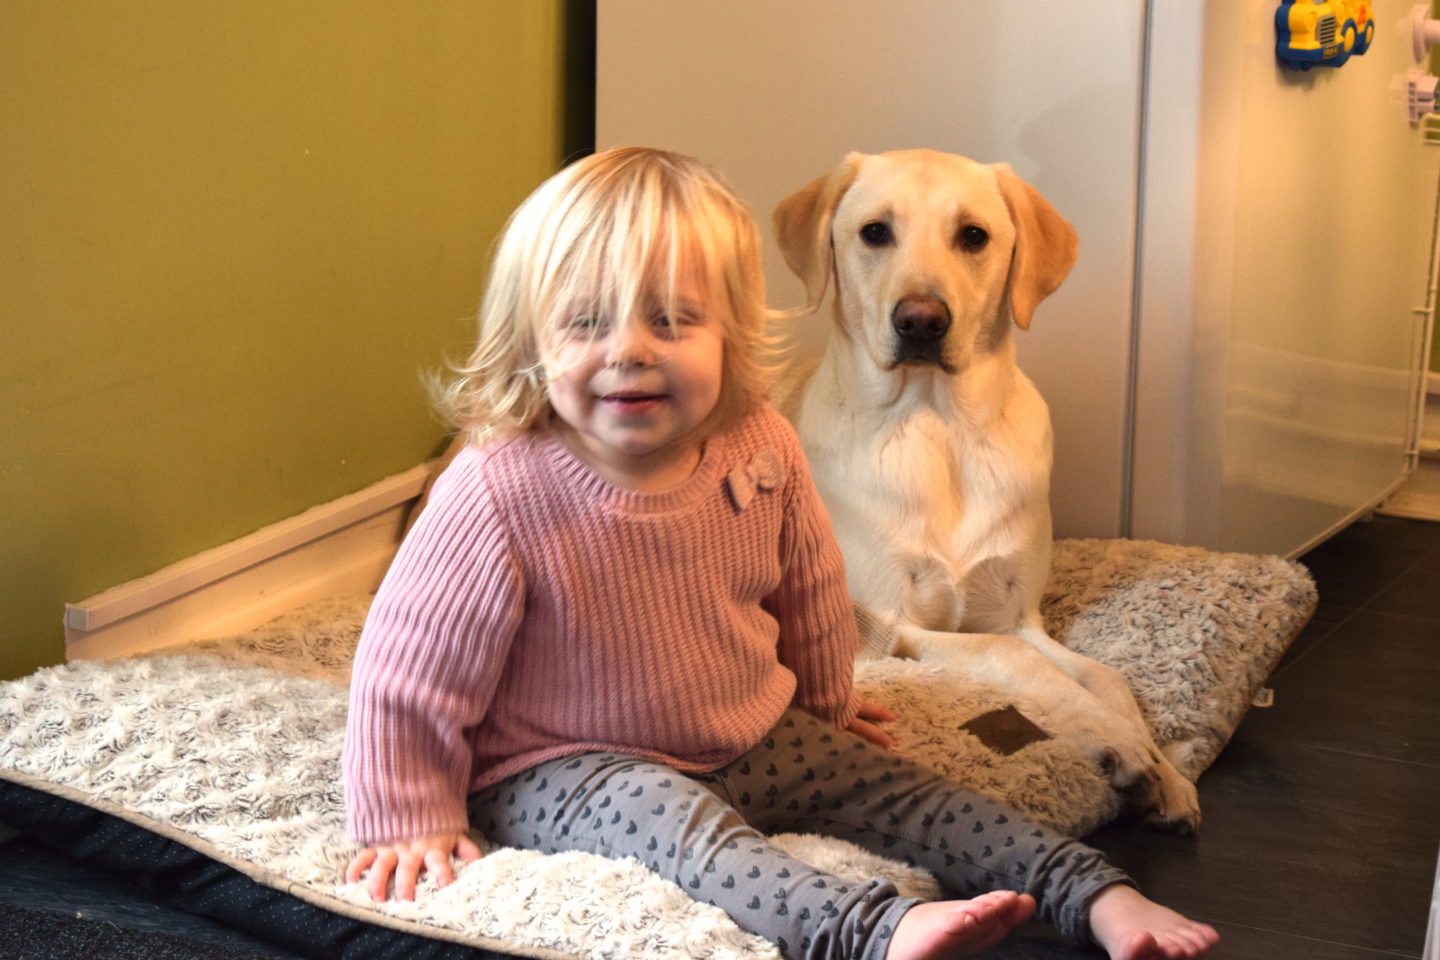 22 months old girl sitting in a dog bed with a yellow labrador